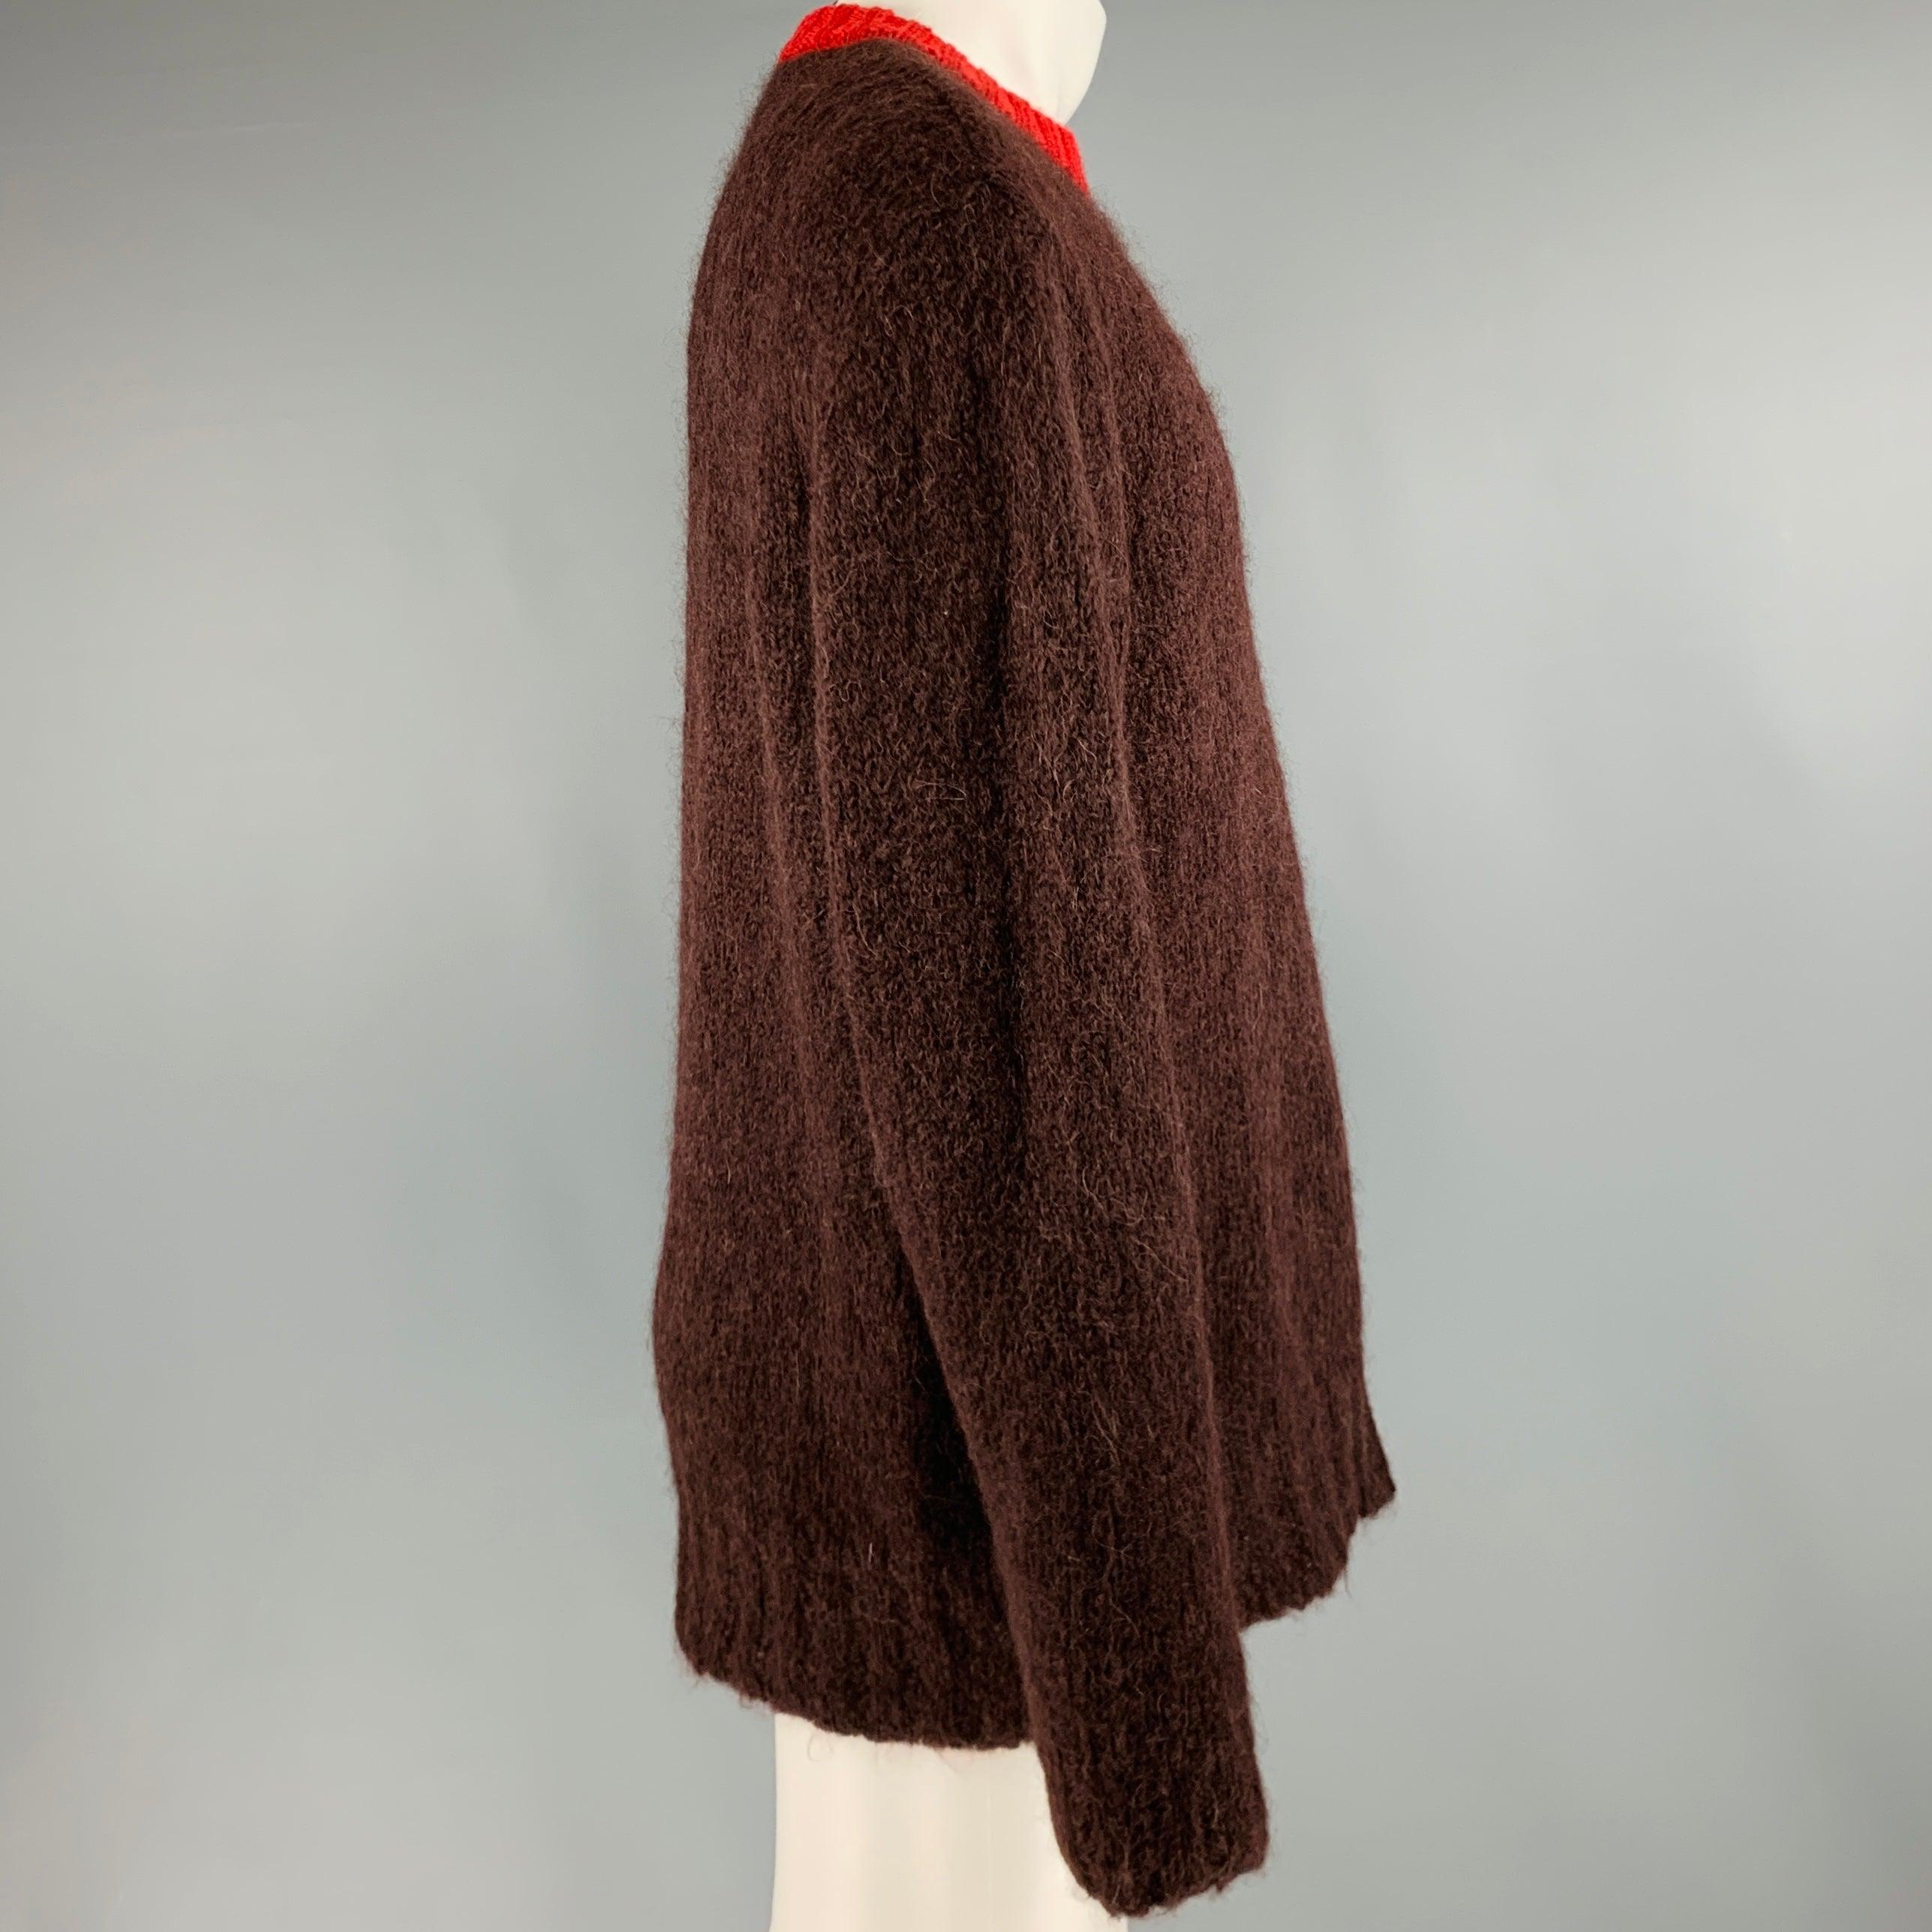 MARNI sweater
in a brown mohair blend knit featuring red contrast trim, and crew neck. Made in Italy.Excellent Pre-Owned Condition. 

Marked:   50 

Measurements: 
 
Shoulder: 19 inches Chest: 50 inches Sleeve: 27 inches Length: 29.5 inches 
  
  
